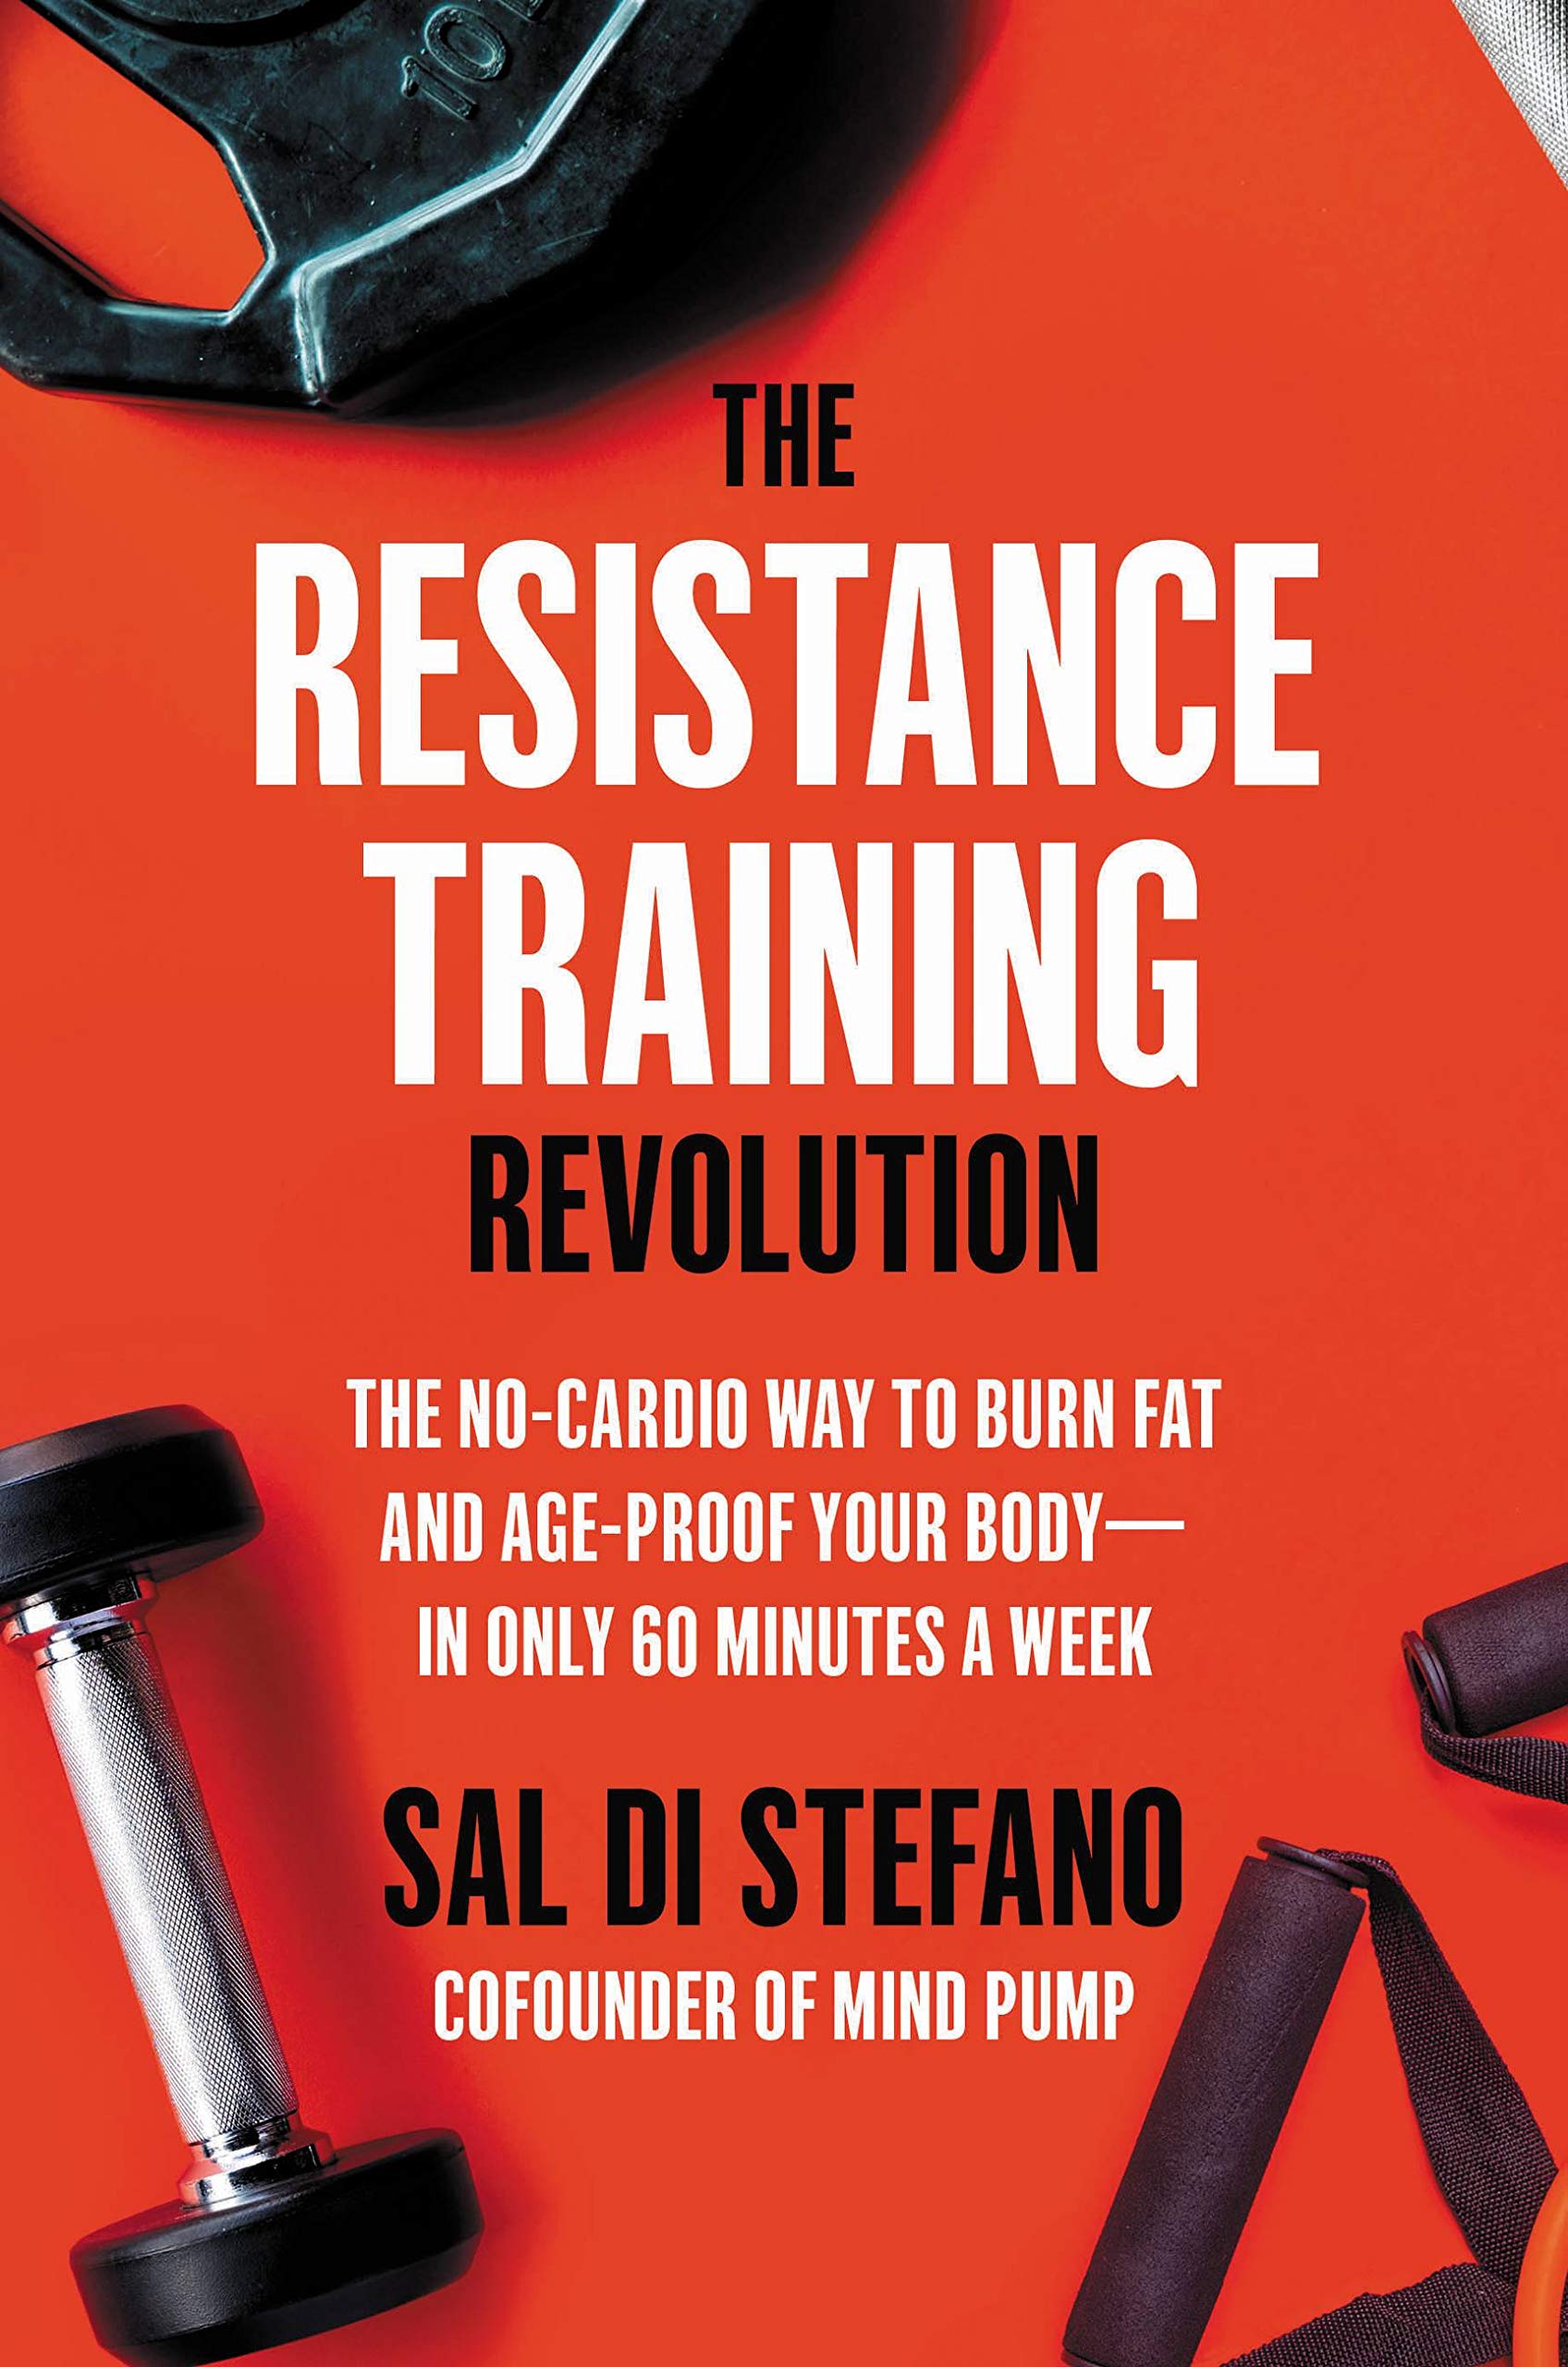 The Resistance Training Revolution : The No-Cardio Way to Burn Fat and Age-Proof Your Bodyin Only 60 Minutes a Week [Hardcover] หนังสือภาษาอังกฤษพร้อมส่ง